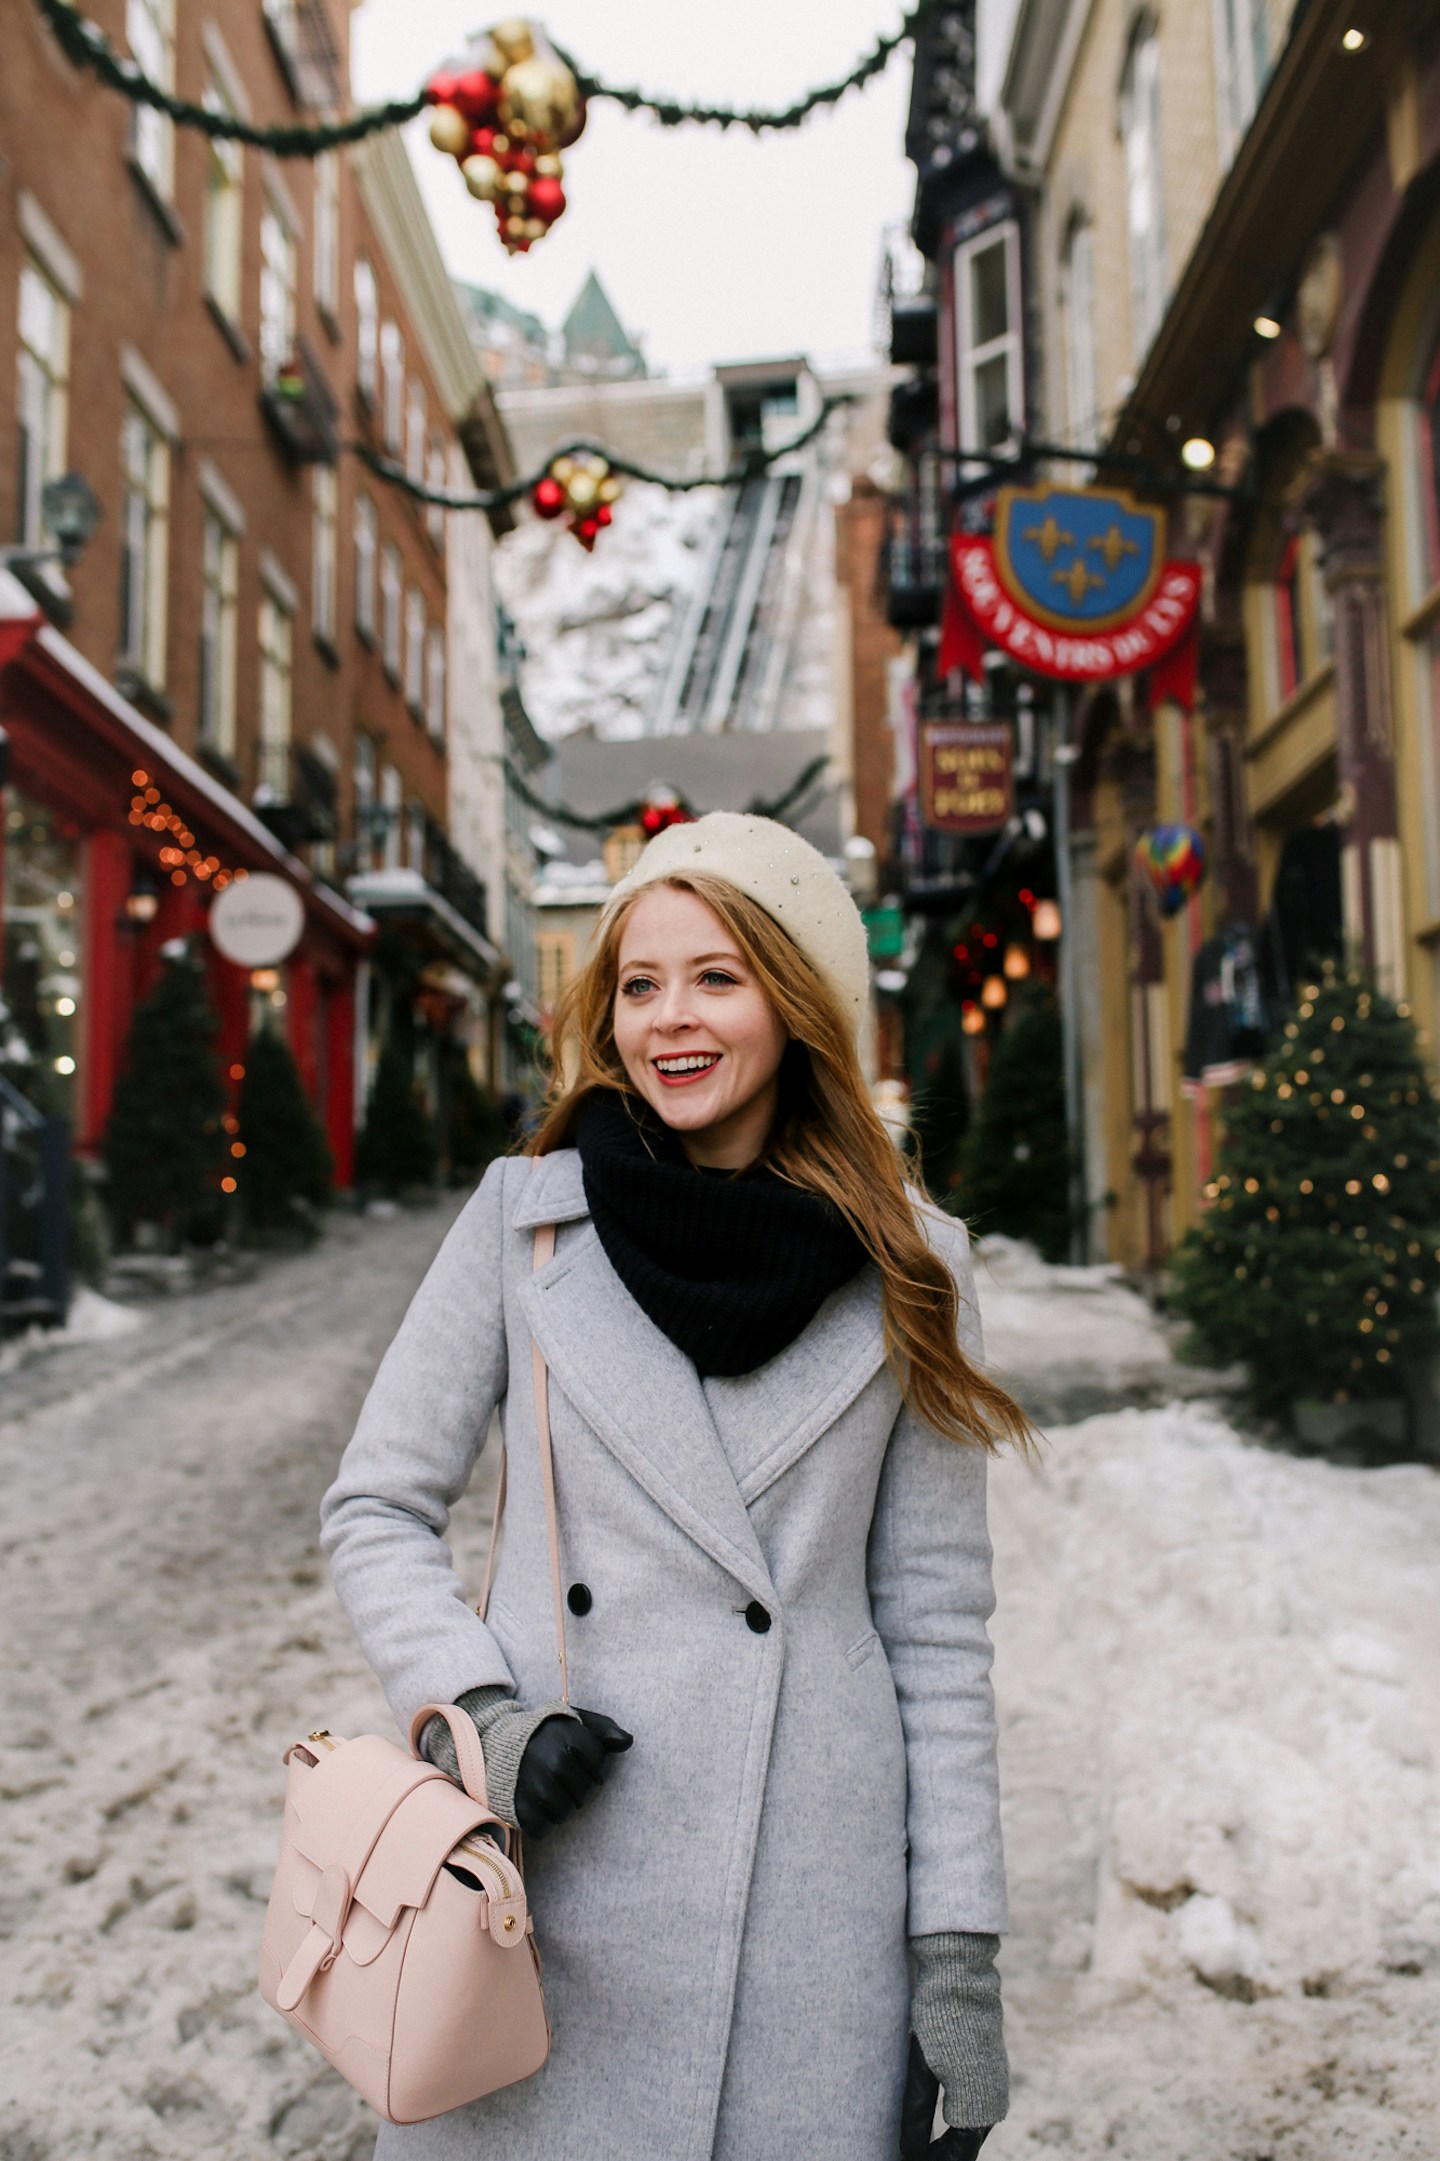 Top 10 things to do in Quebec City in a winter weekend. This romantic city feels European with cobblestone streets, festive decor and old stone buildings.